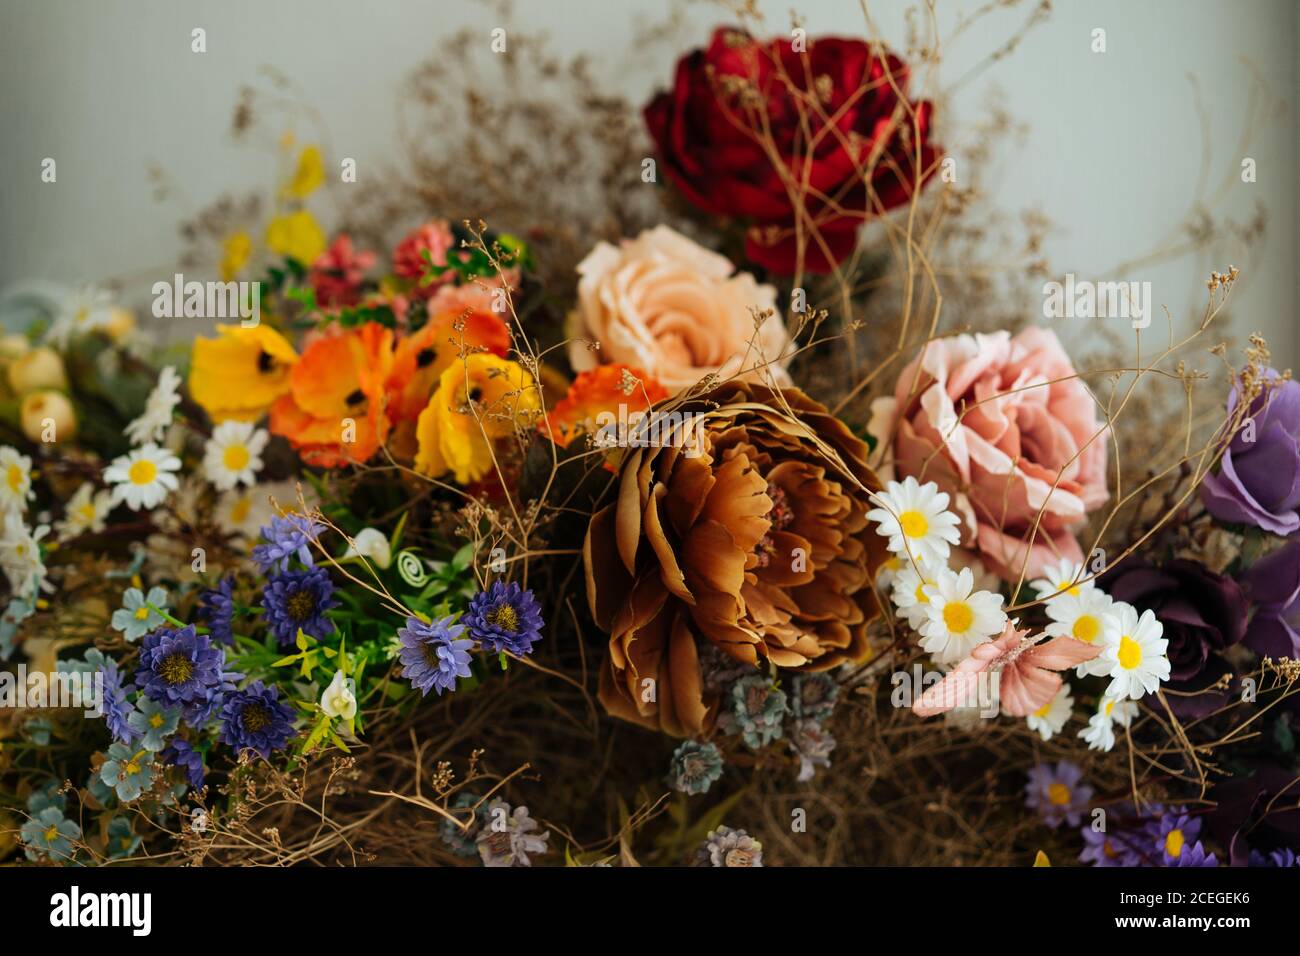 Elegant showy fresh roses and wildflowers picked with beautiful dried flowers and herbs tied up with black cord on grey background Stock Photo